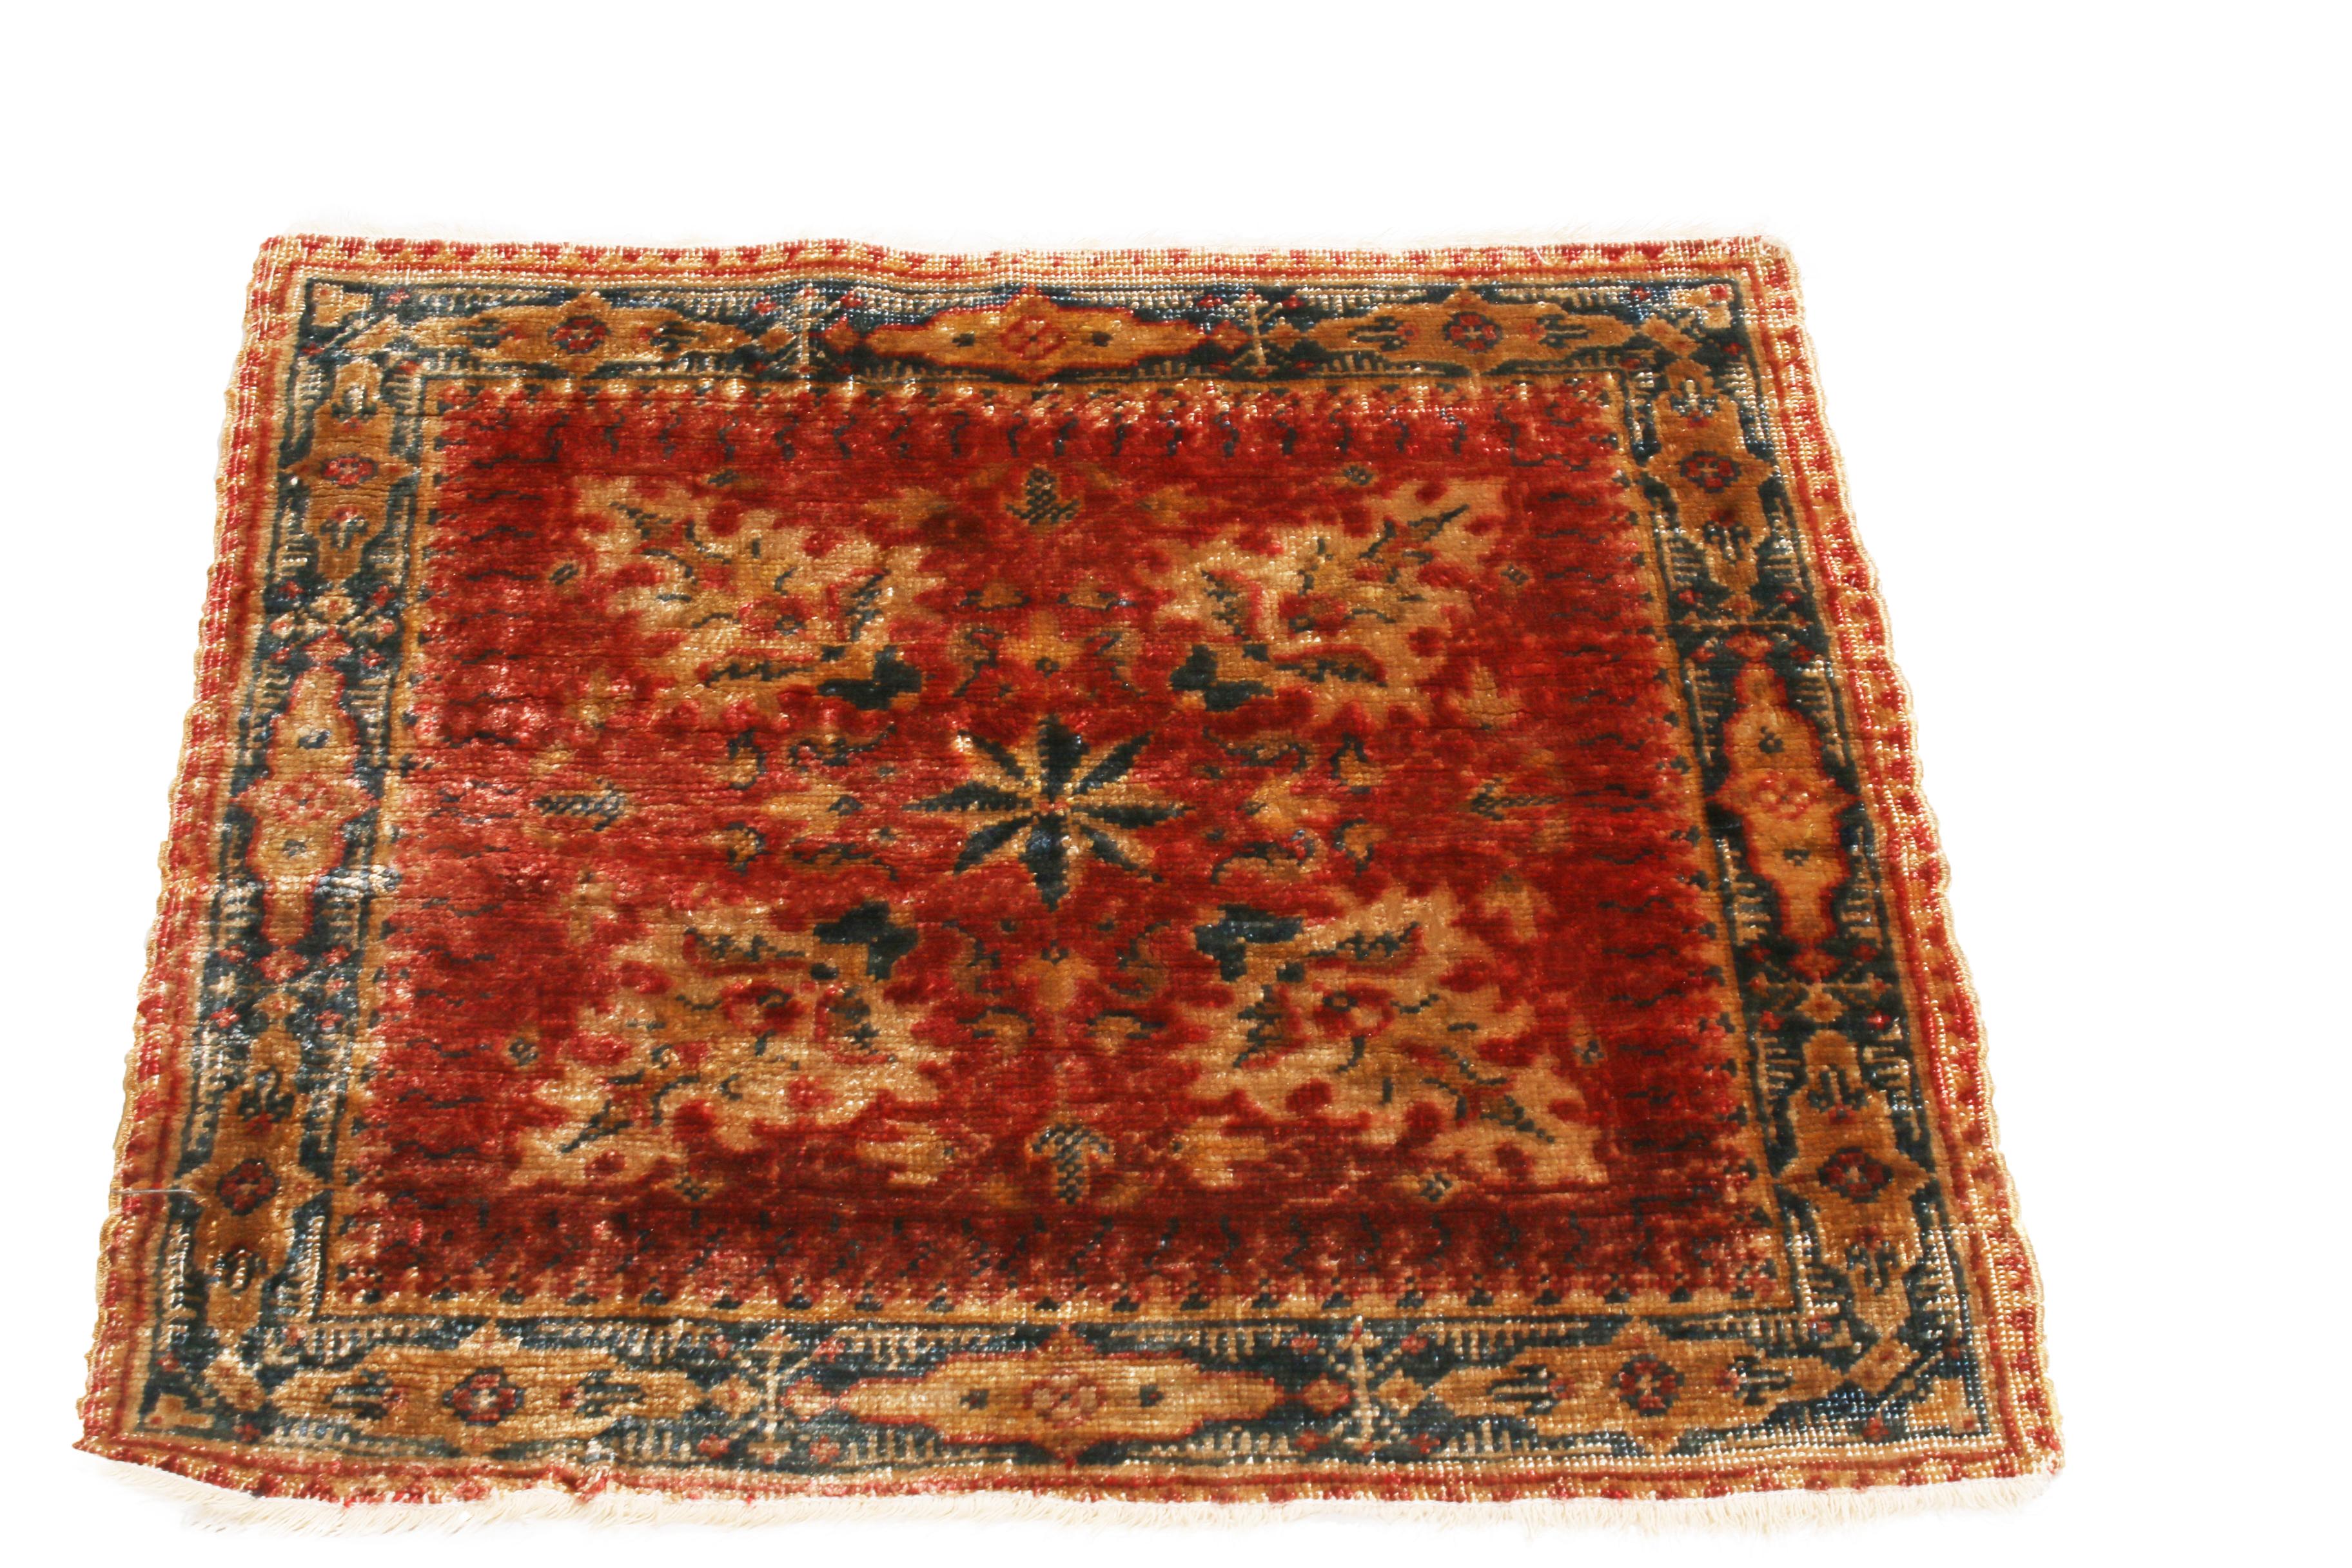 Hand knotted with a luminous, high-quality silk in a combination of vivid and rustic red and beige colorways, this antique Hereke rug originates from Turkey in 1880, crafter in a perfectly square body complemented by its subtly rich royal blue